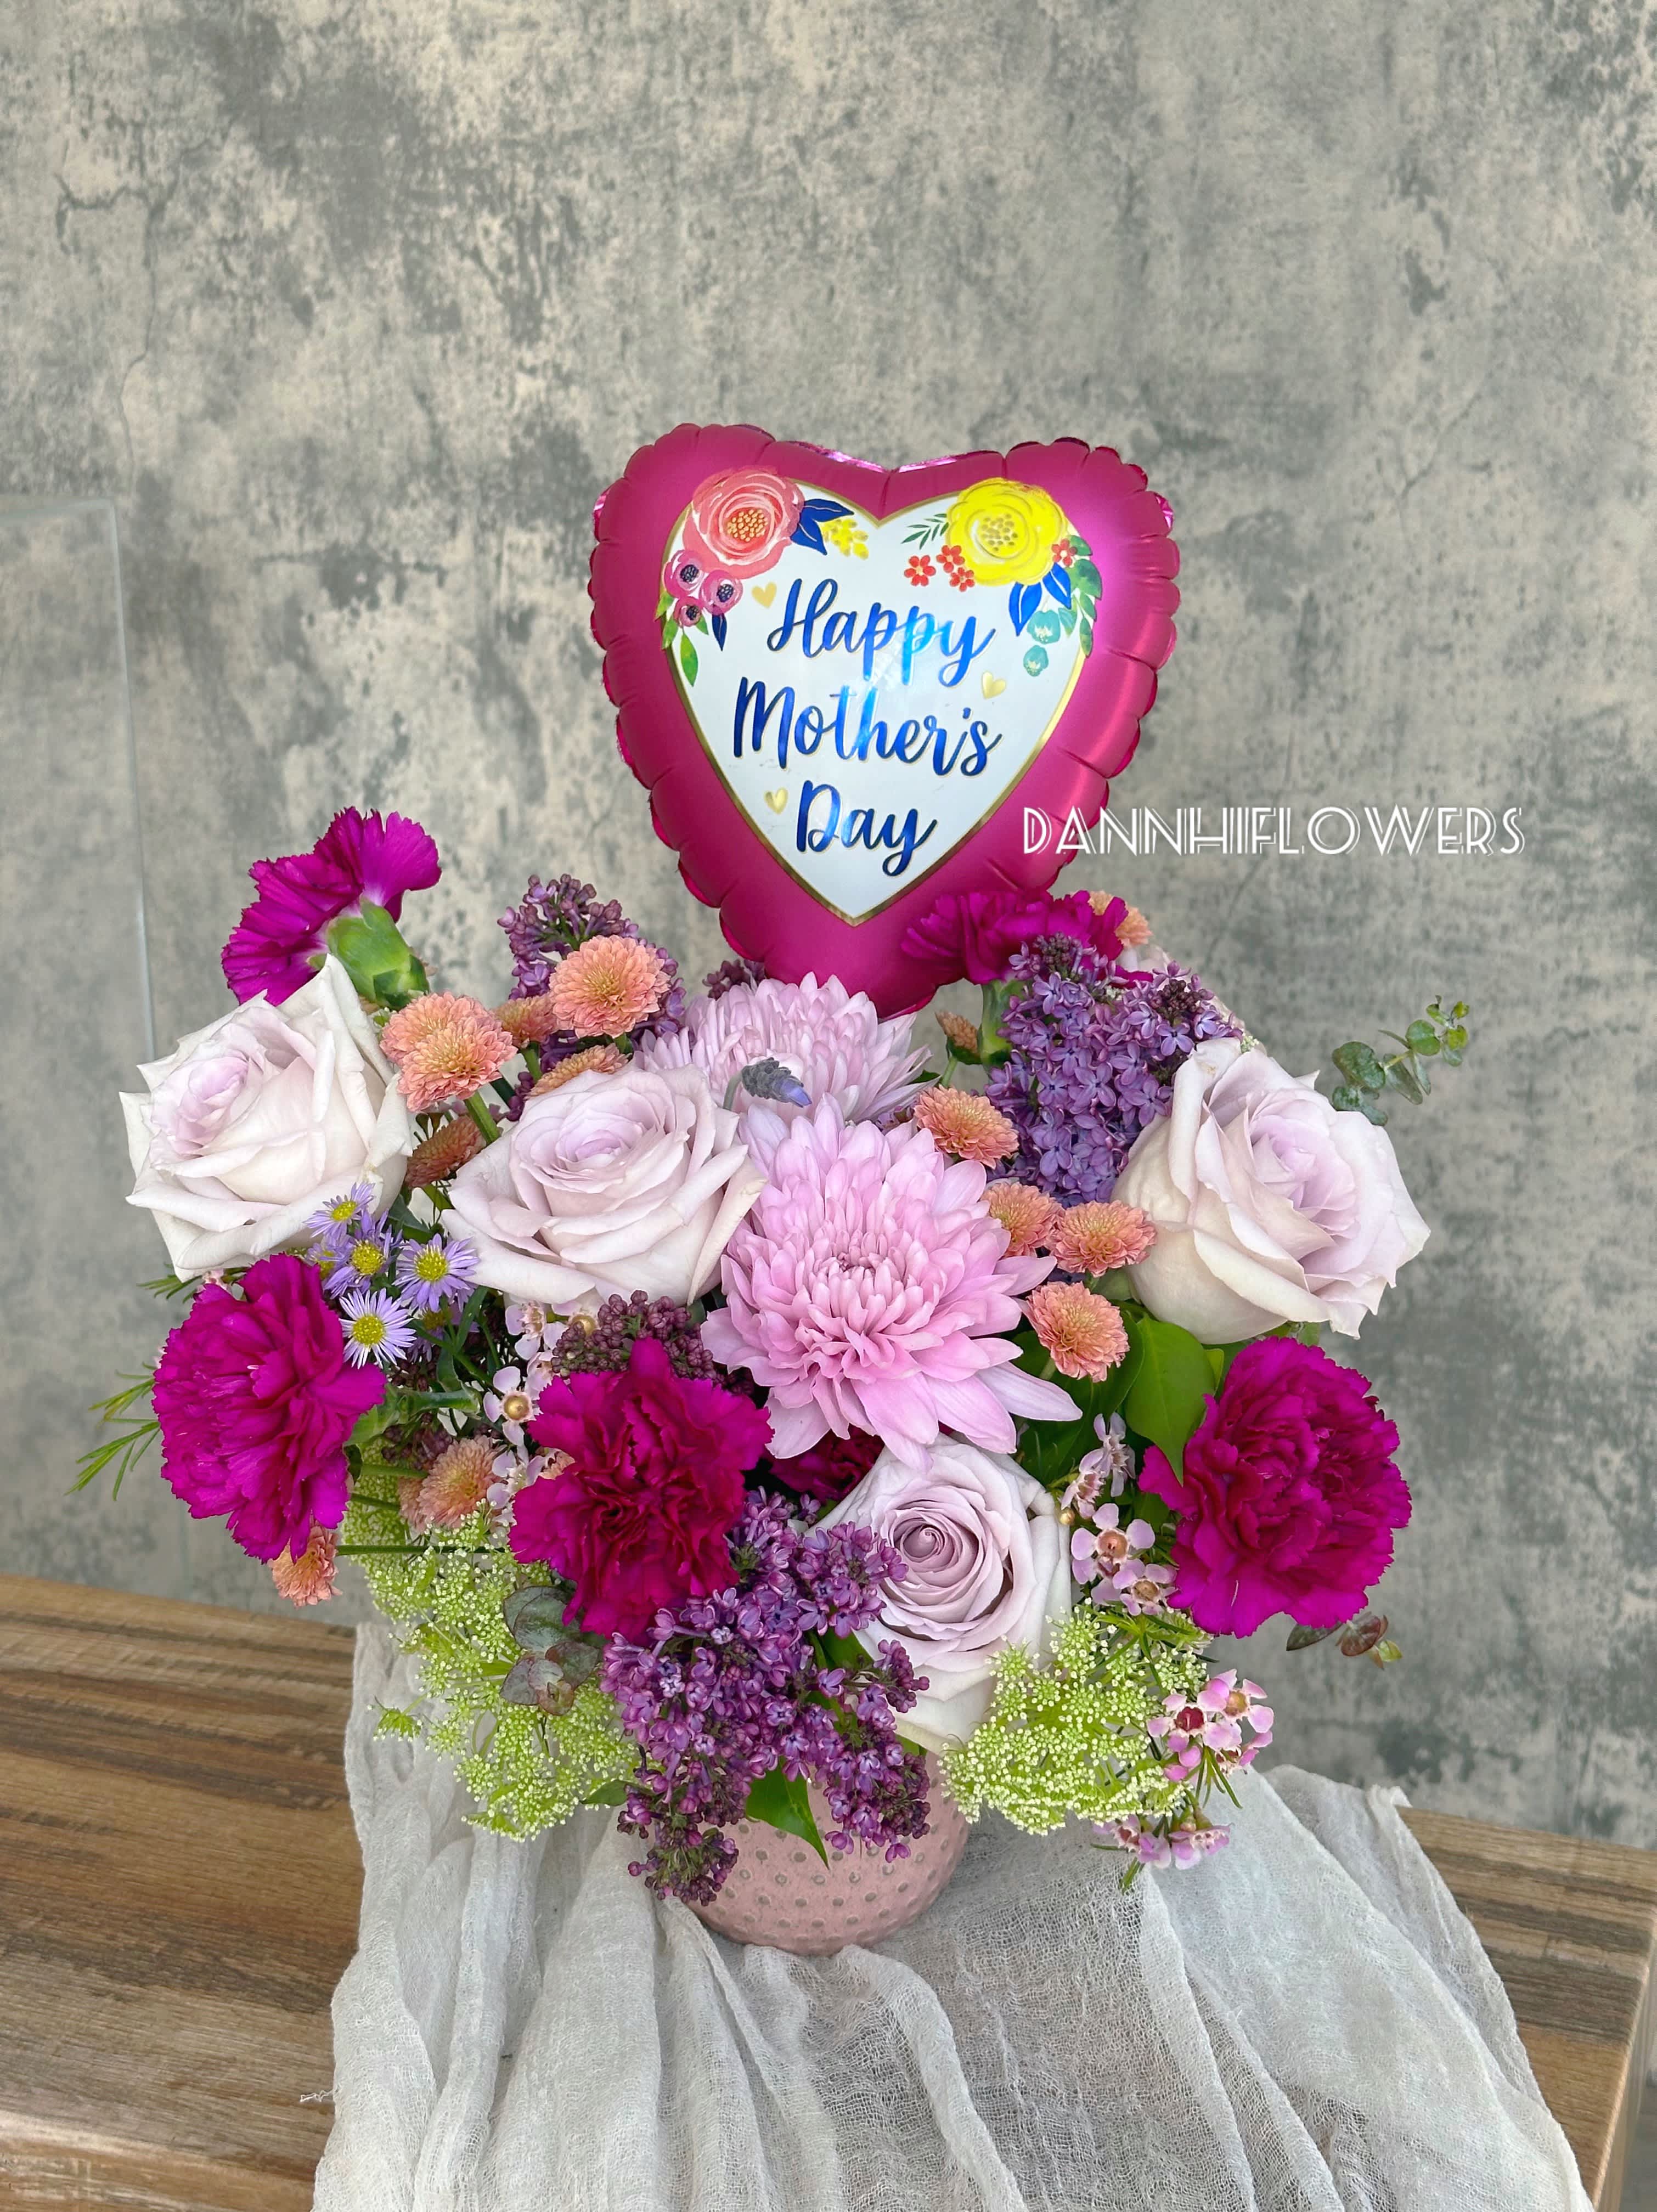 Mom’s Joy - Crafted with a delicate blend of Cremon Mum flowers, very soft lavender roses, and elegant carnations, this enchanting arrangement is designed to bring joy to every Mum on her special day.  Bouquet will be delivered appropriately as pictured.  Additional flowers will be added to enhance the arrangement for Deluxe size.  *9inches Balloon is included.